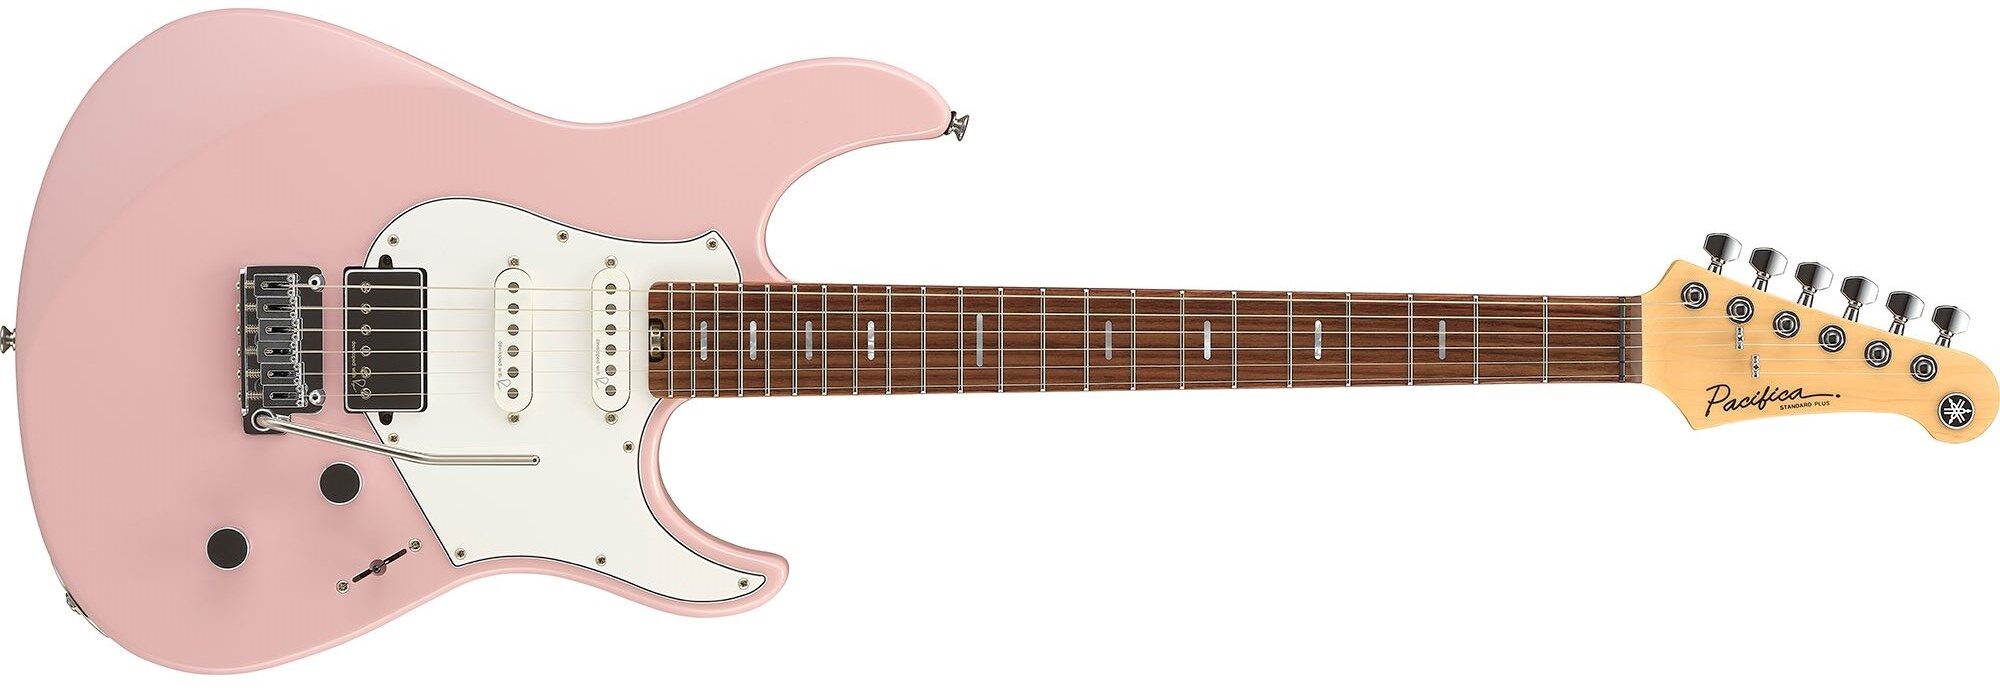 Pink and white electric guitar.